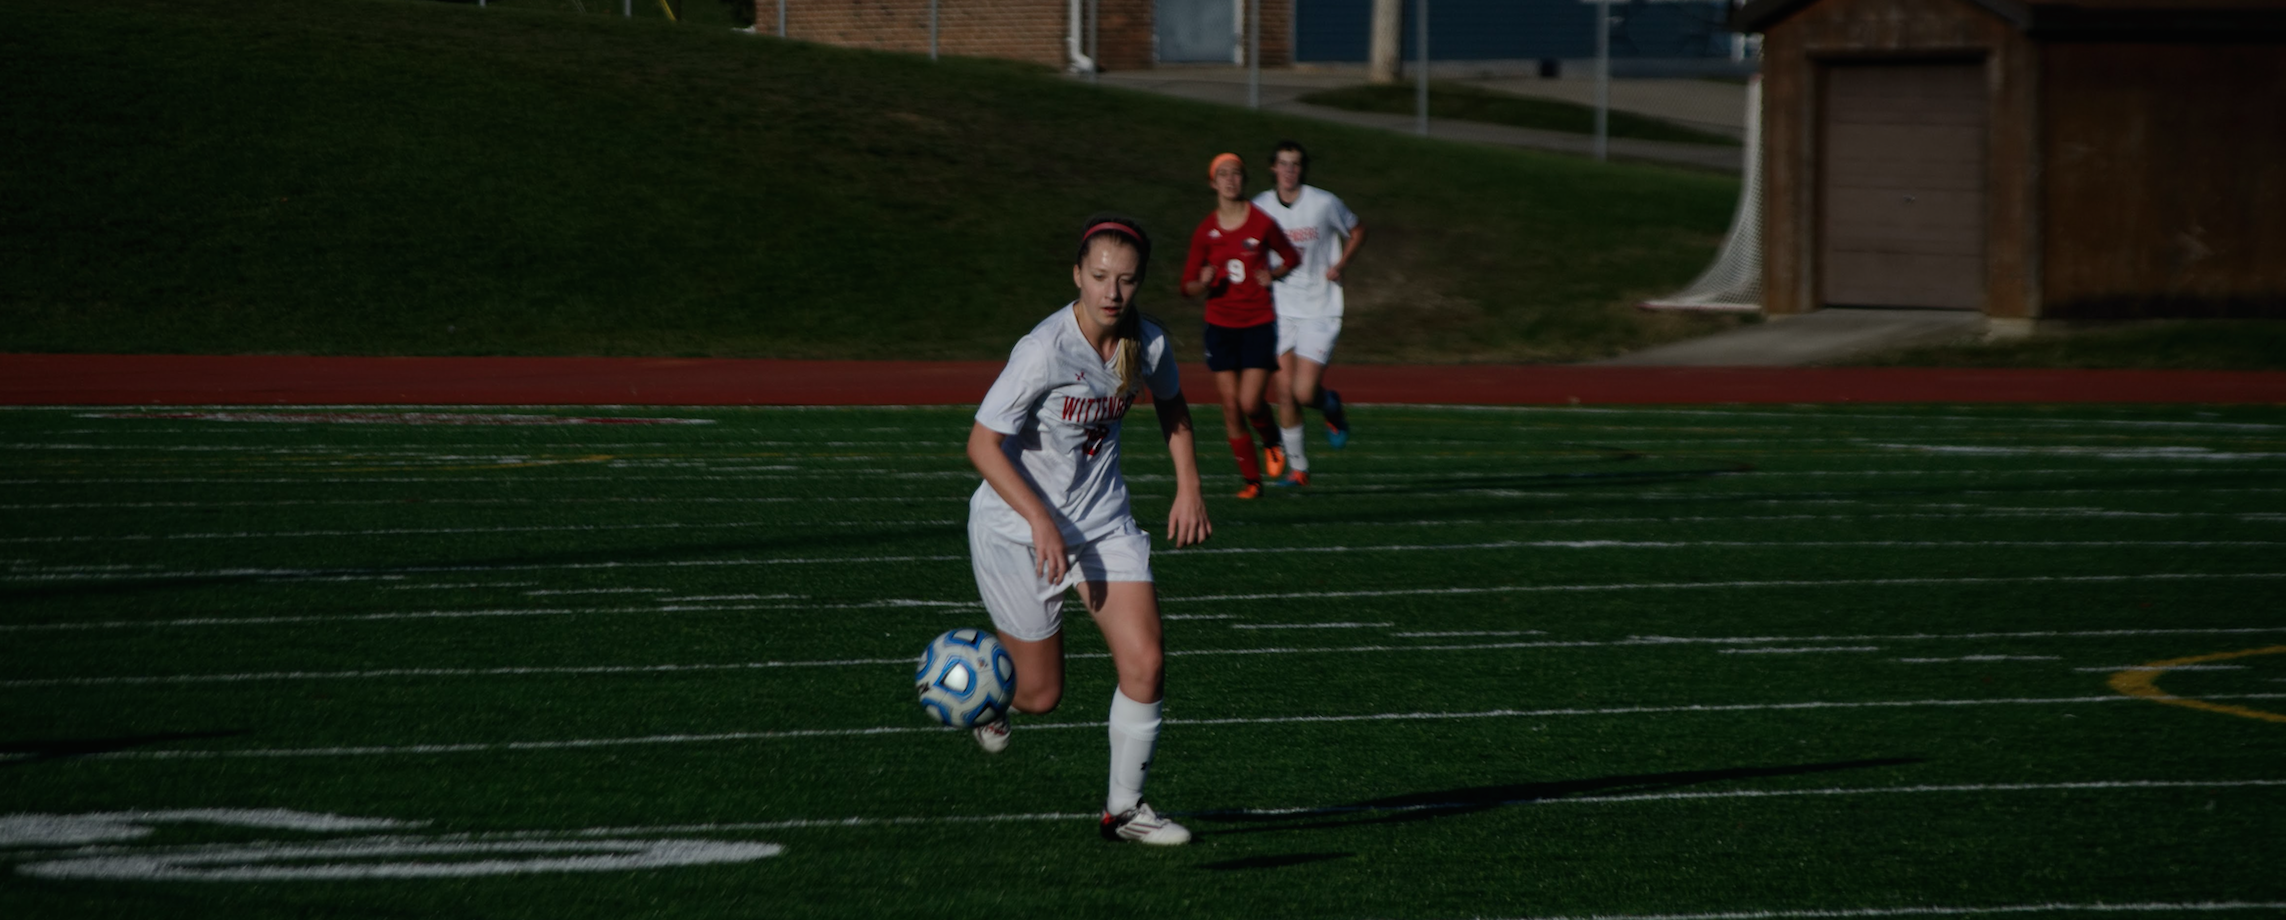 Tigers Fall to Denison in NCAC Championship 1-0